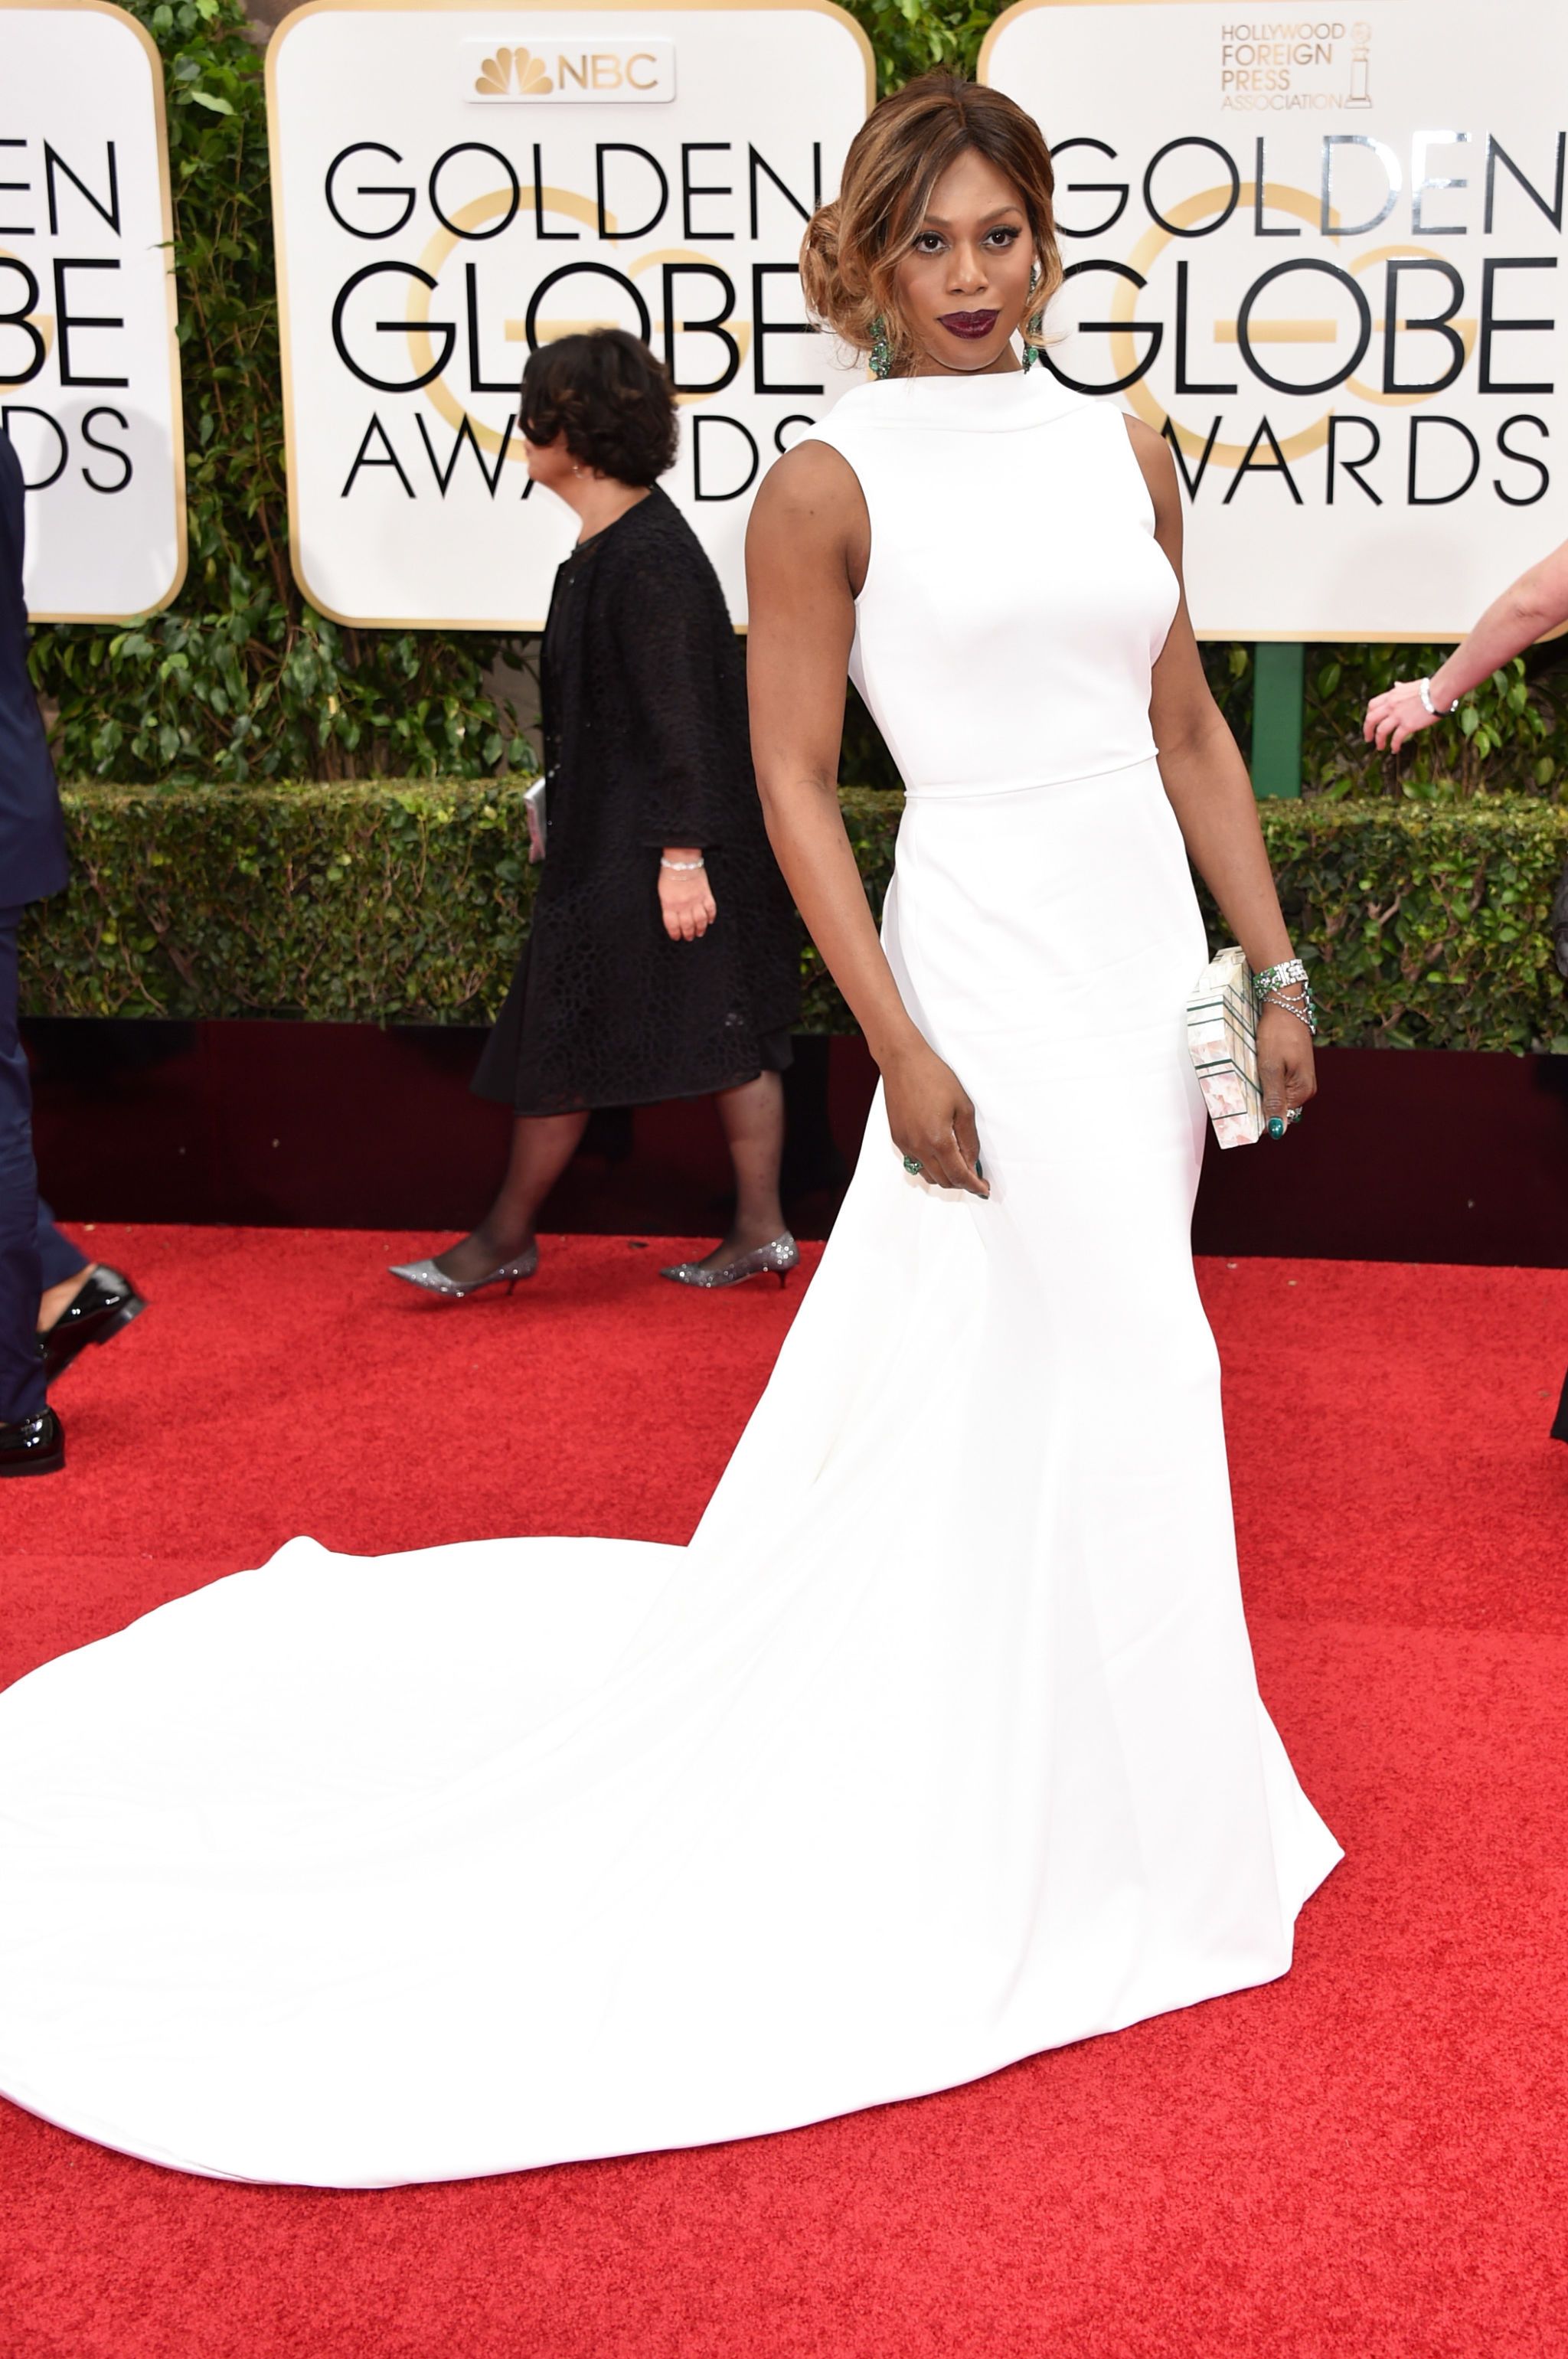 The Best Golden Globes Red Carpet Dresses Of All Time